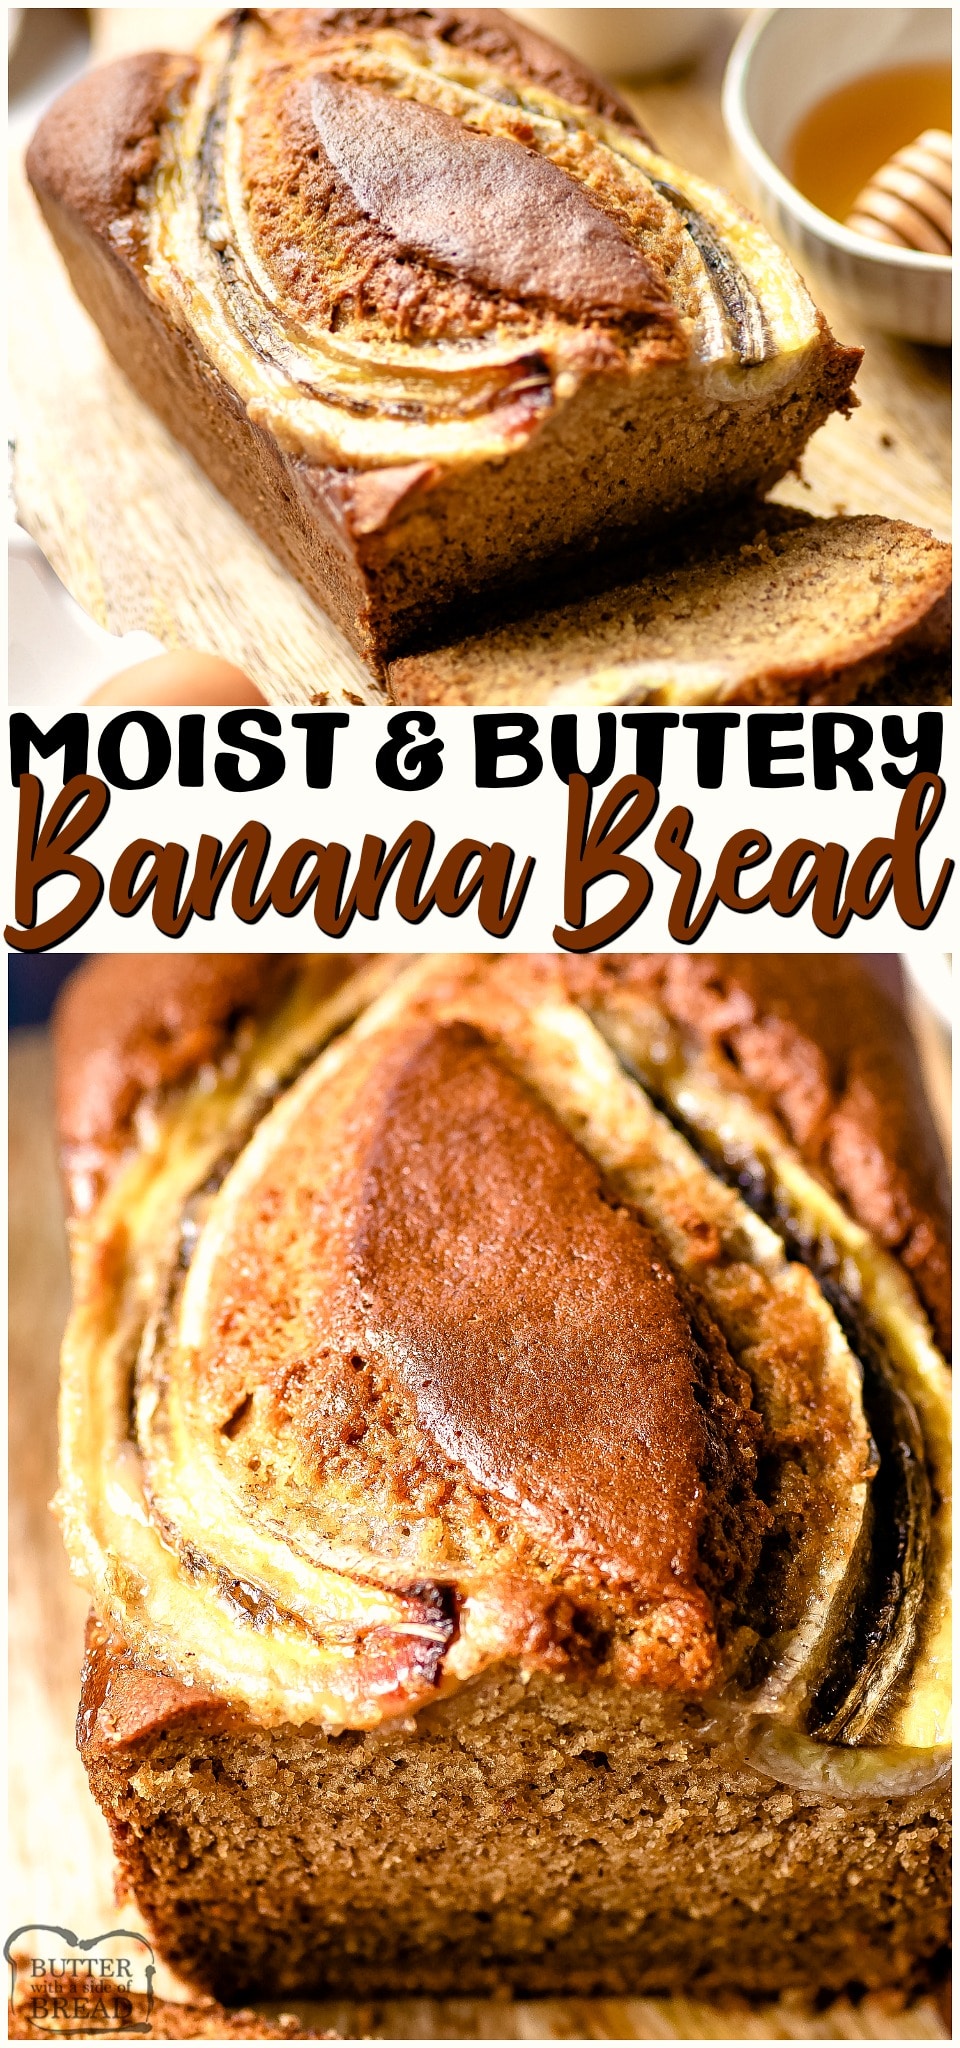 This delicious moist banana bread recipe is made with ALL butter! This makes it rich, flavorful, and mouth wateringly good. You're going to love this simple banana bread recipe!